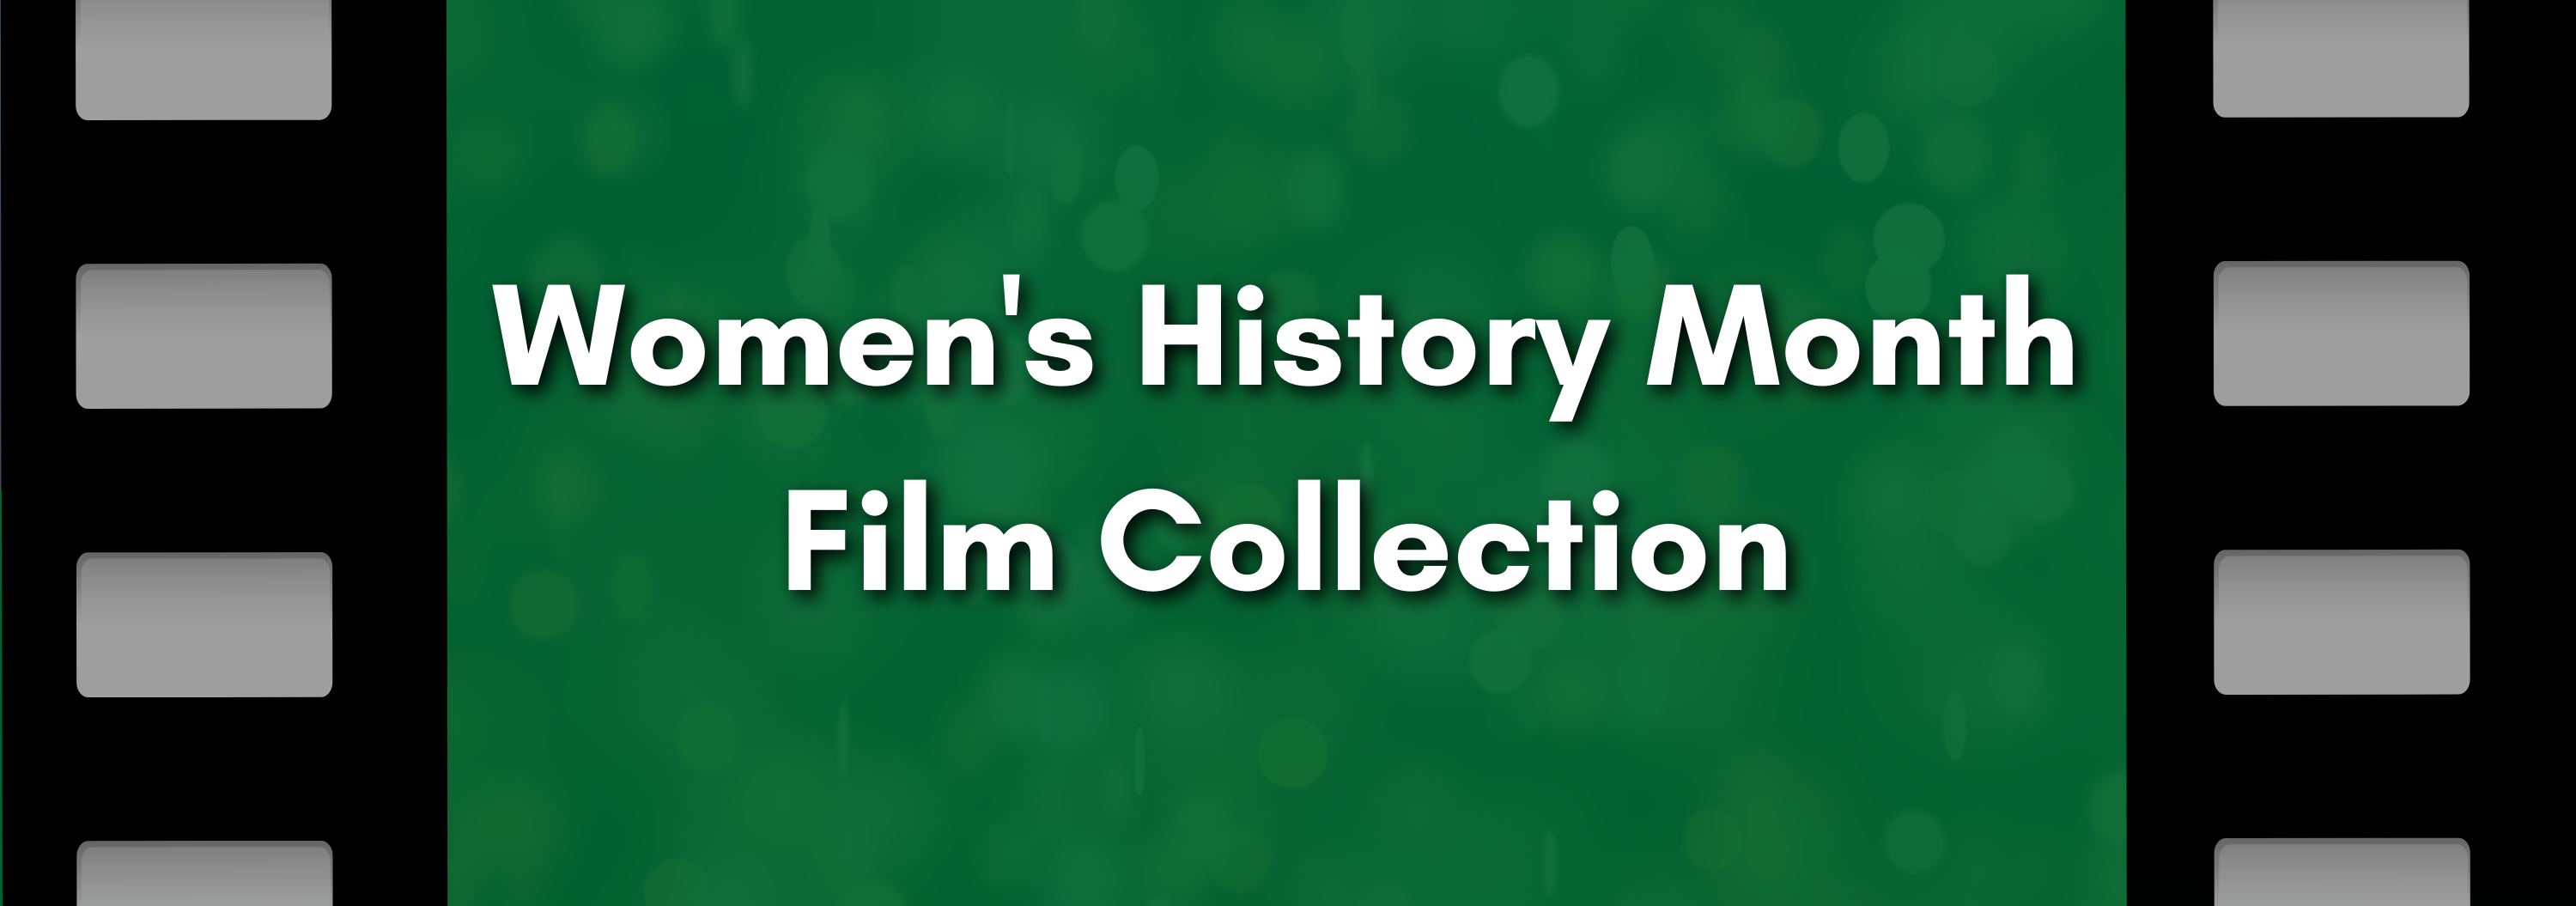 Women's History Month Film Collection